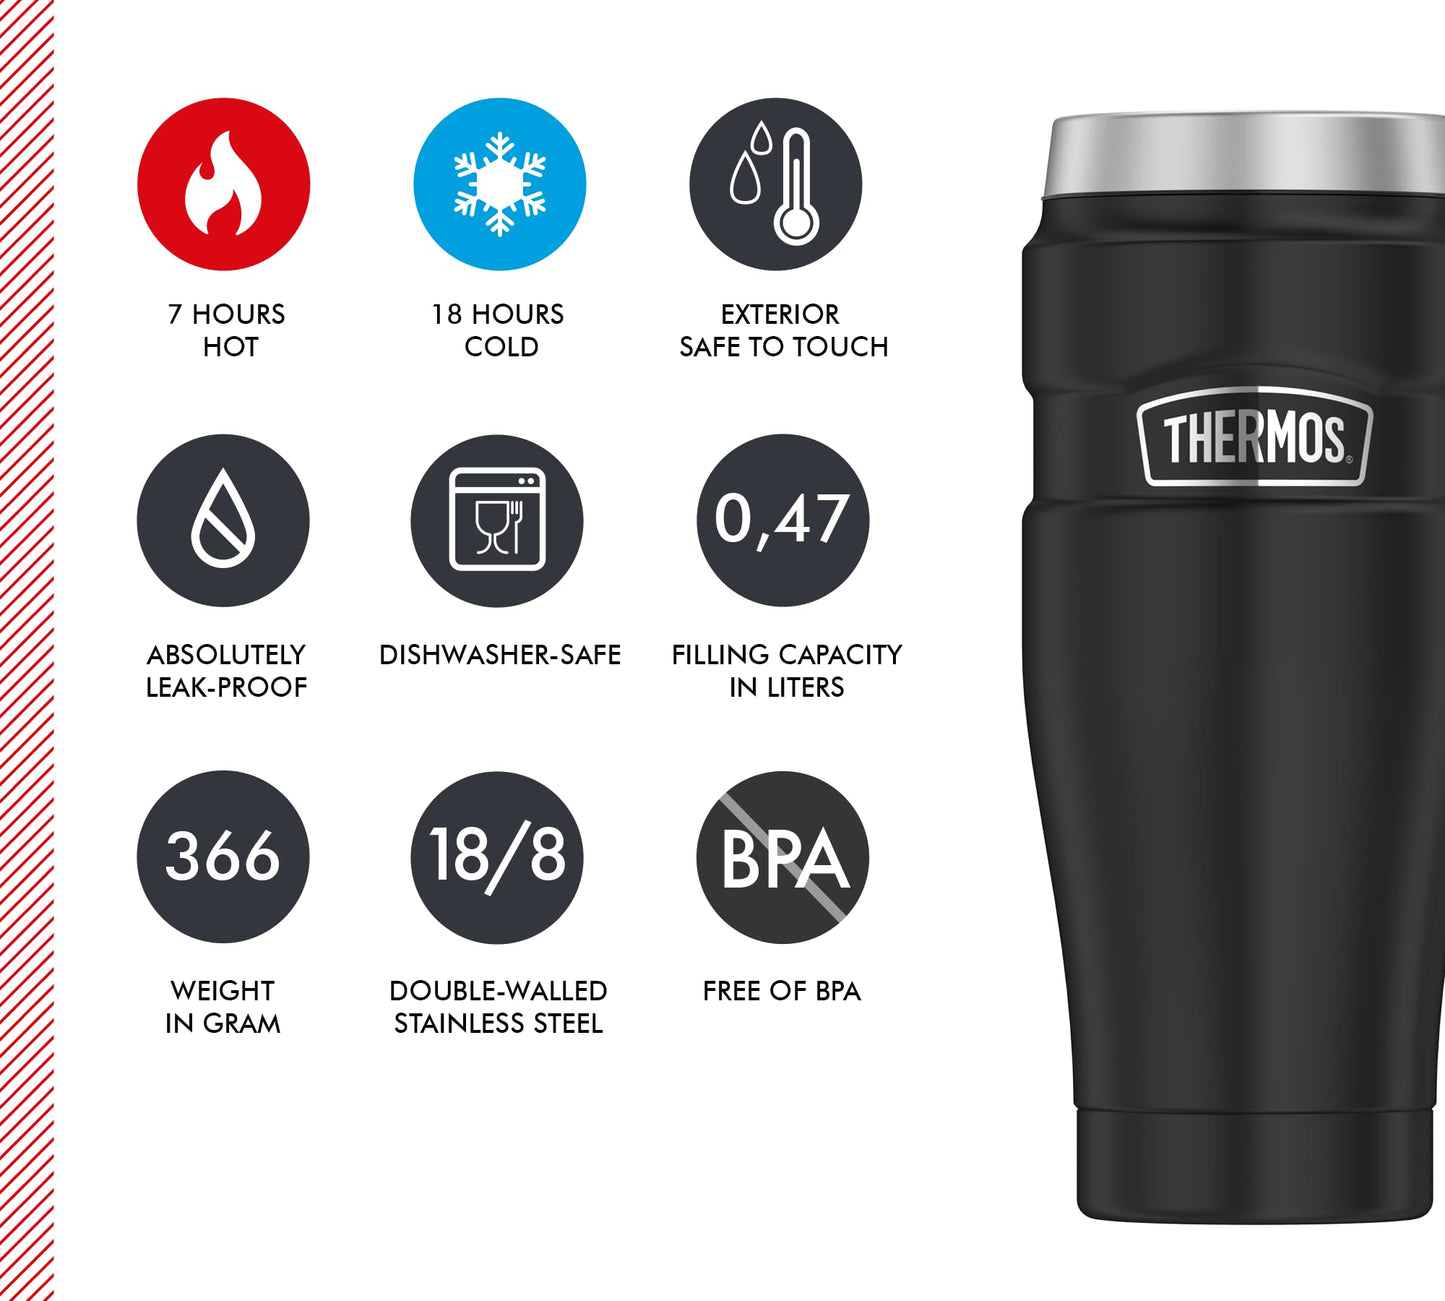 Thermos Thermobecher 470ml Stainless King - Charcoal Black